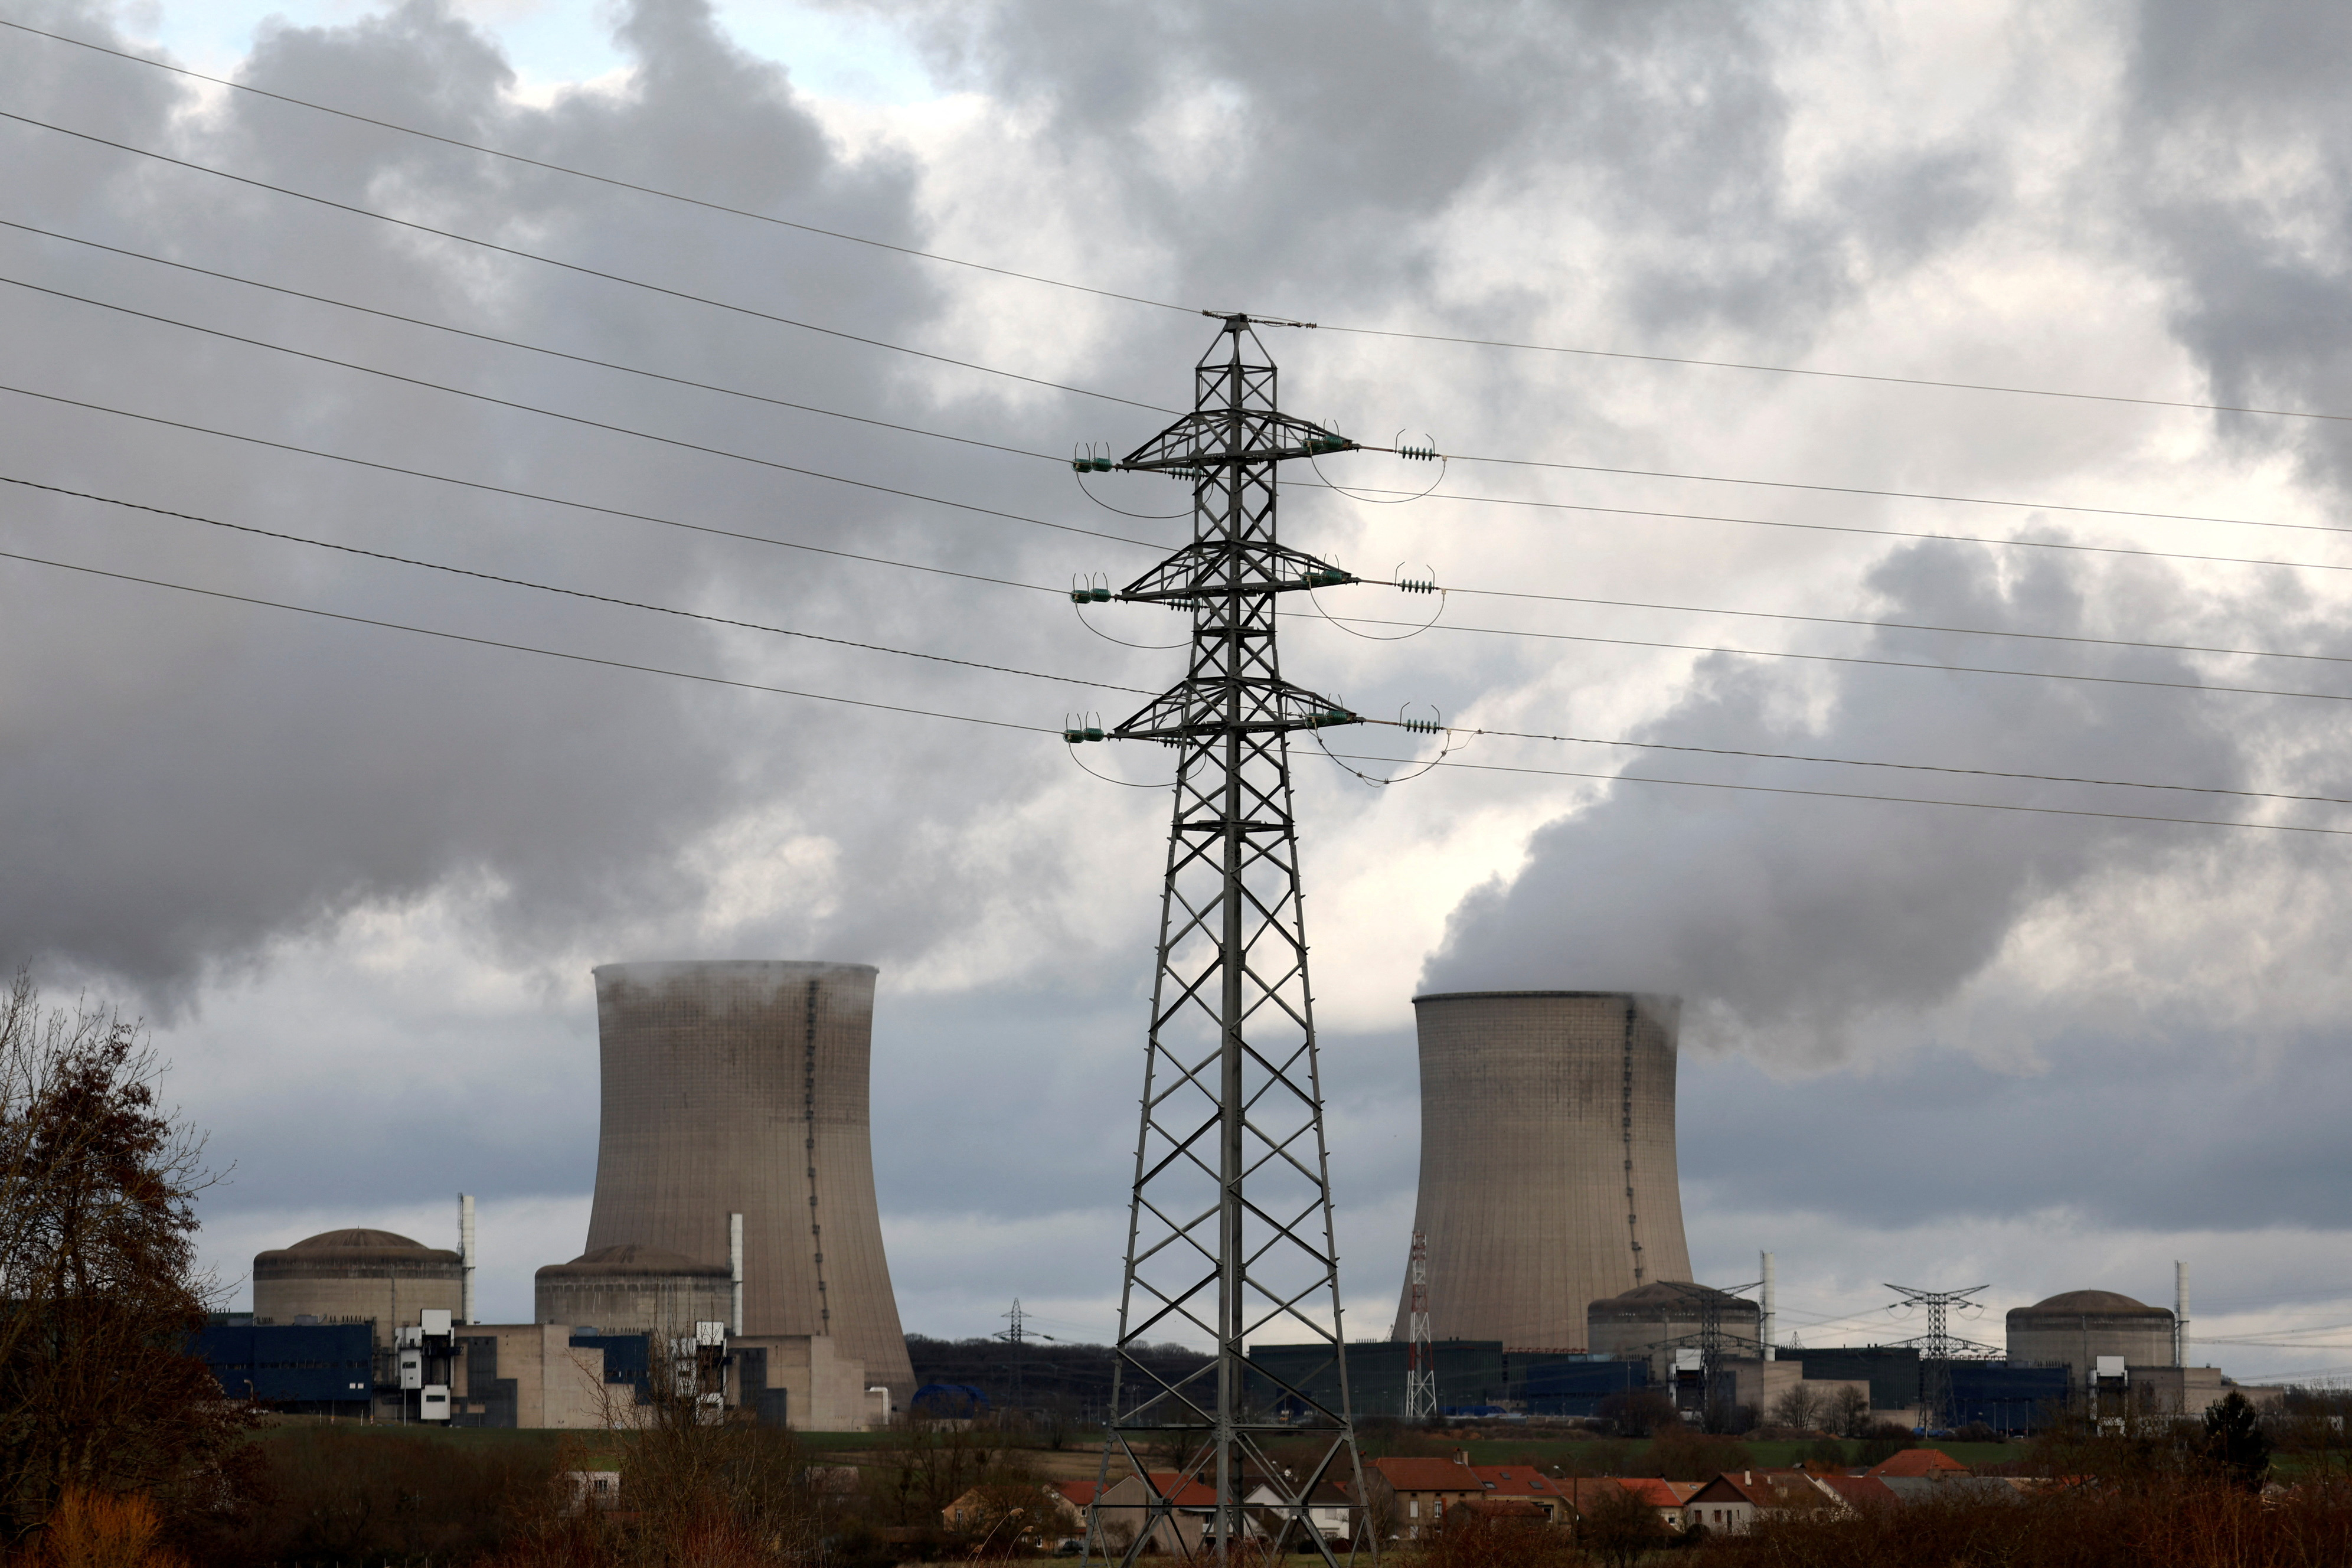 A general view shows the cooling towers and the reactors of the Electricite de France (EDF) nuclear power plant in Cattenom